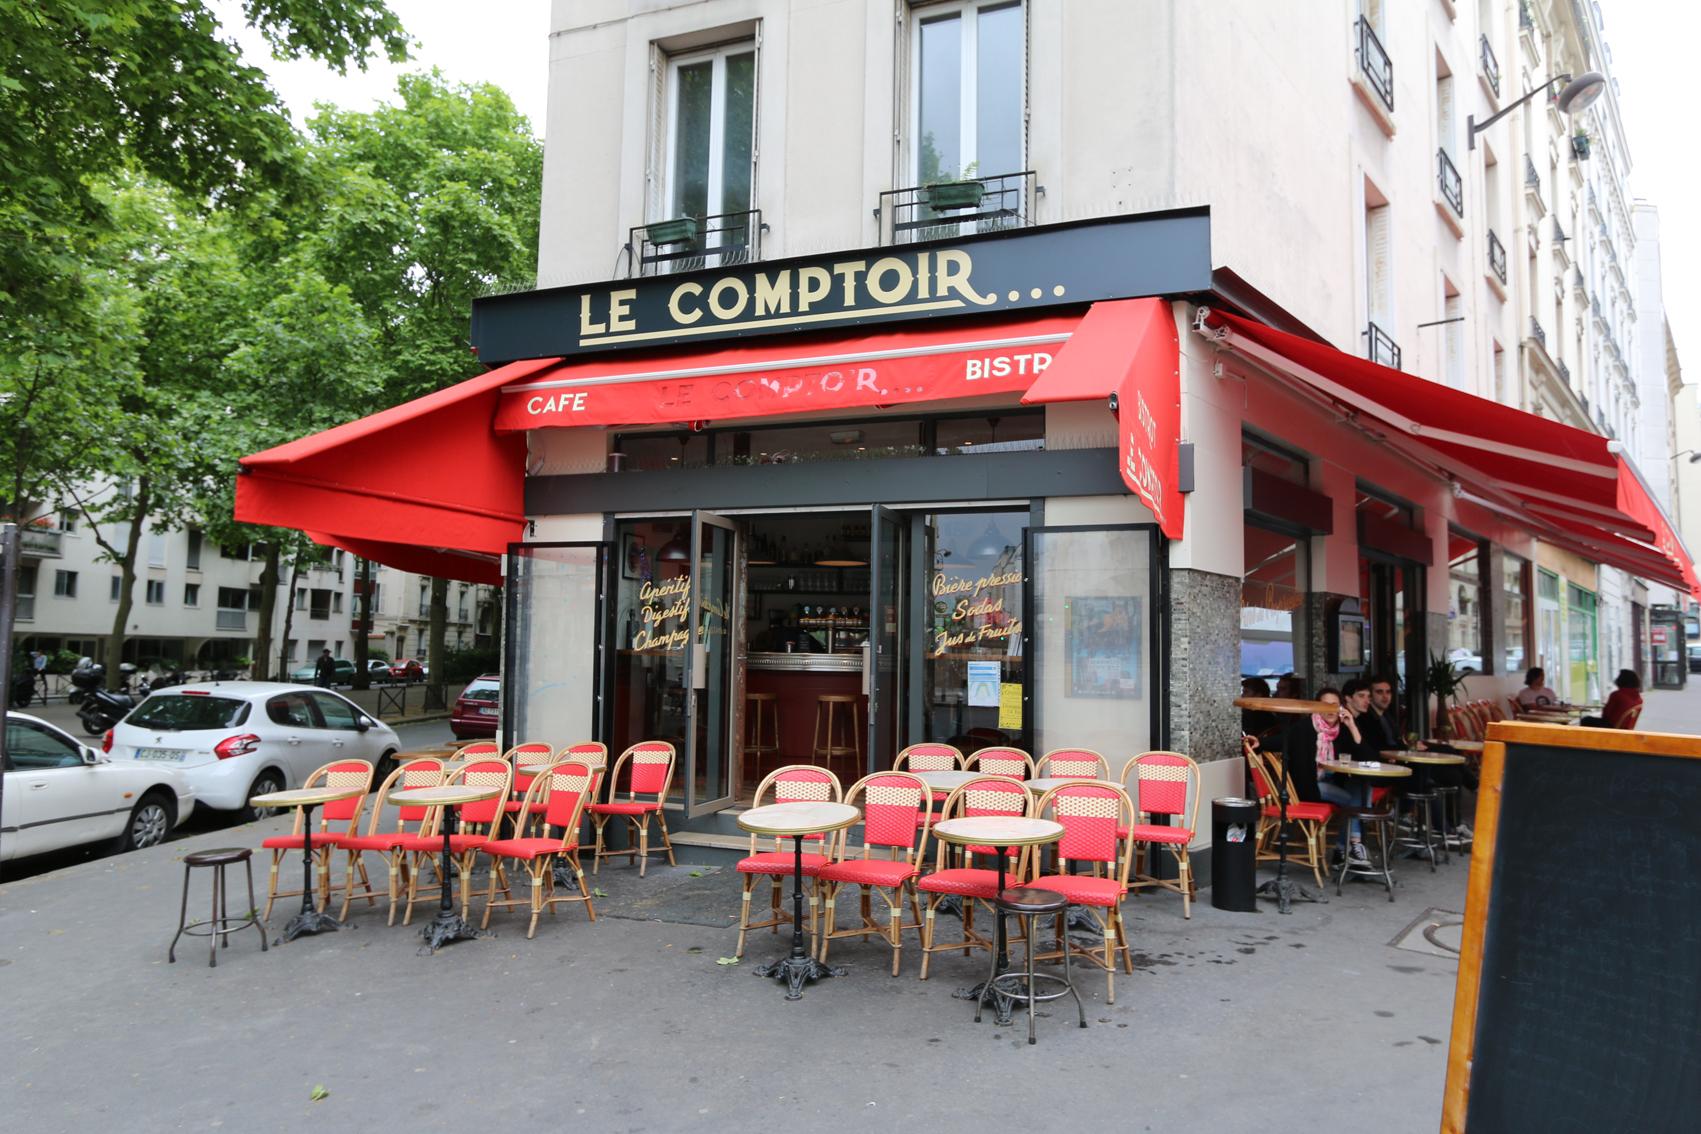 Cover image of this place Comptoir des catacombes 